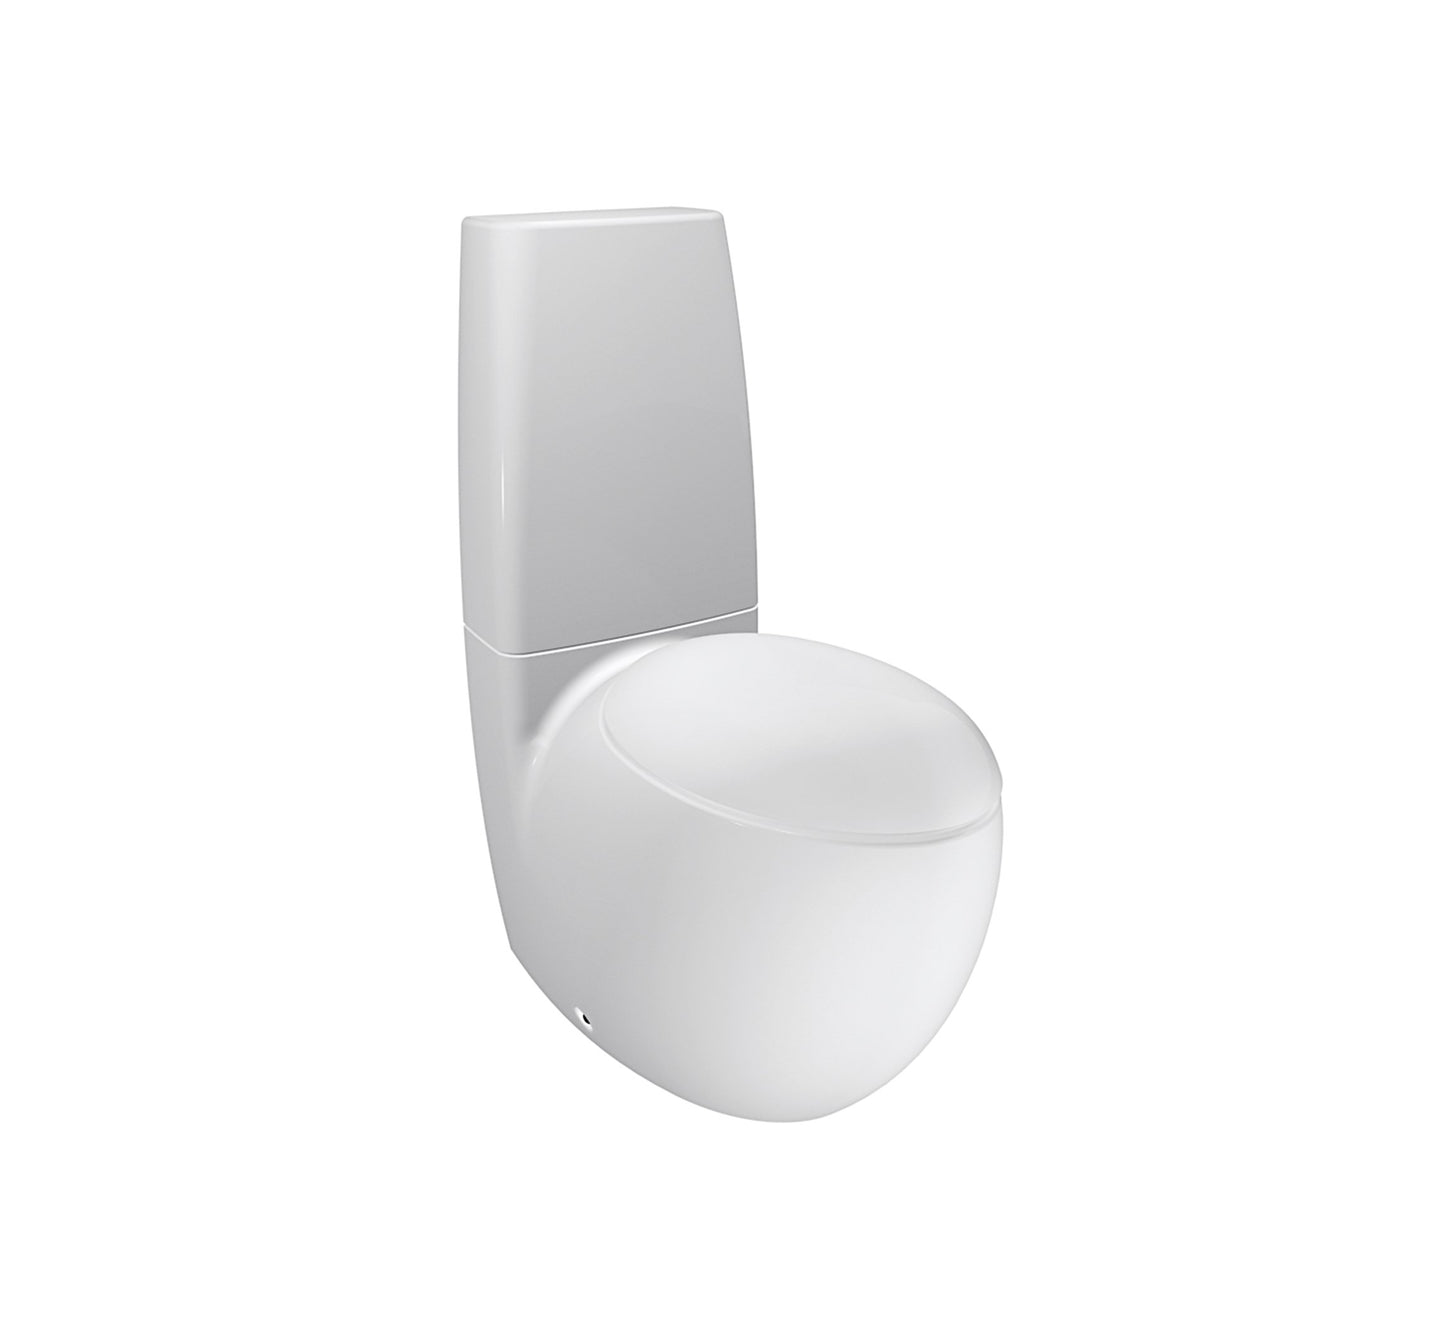 LAUFEN ALESSI ONE WASHDOWN WC, FLOORSTANDING, CERAMIC CISTERN, HORIZONTAL OR VERTICAL OUTLET, REAR WATER SUPPLY, DUAL FLUSH,Ã‚Â  CHROME PLATED PUSH BUTTON WHITE LCC - 8.2297.6.400.000.1 - Tadmur Trading